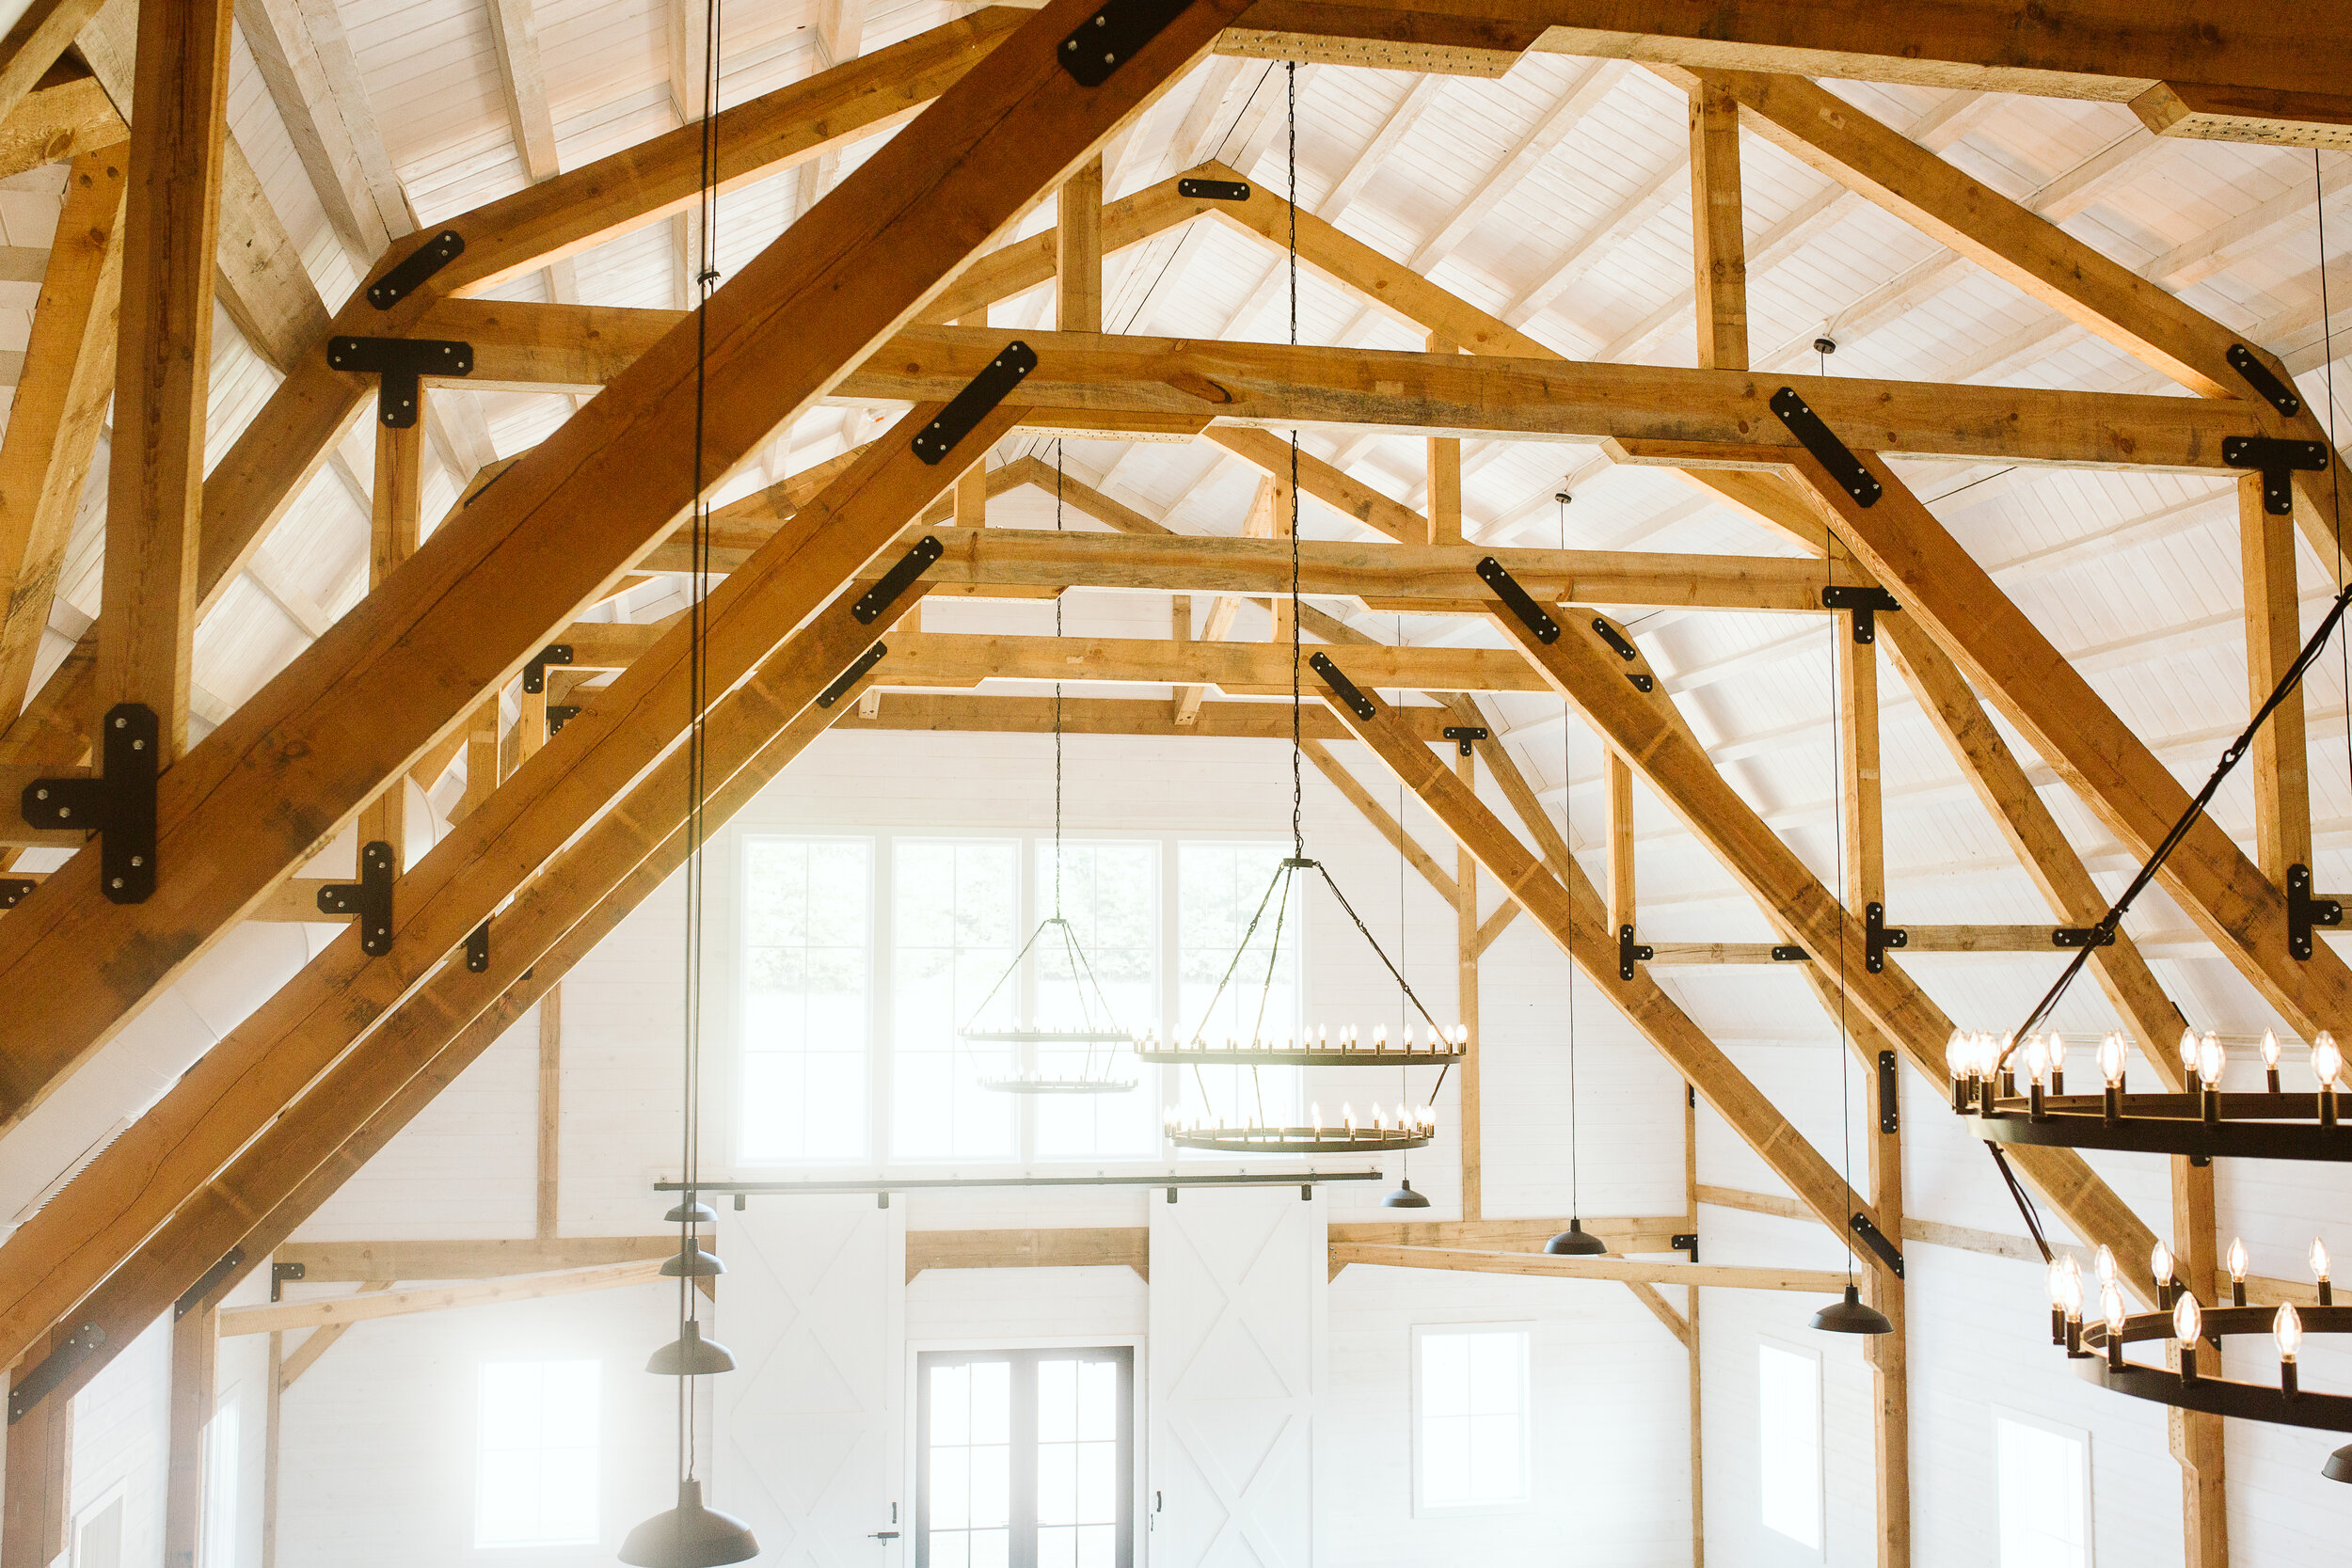  [PHOTO] A sunny Gambrel Room, featuring exposed wooden beams 